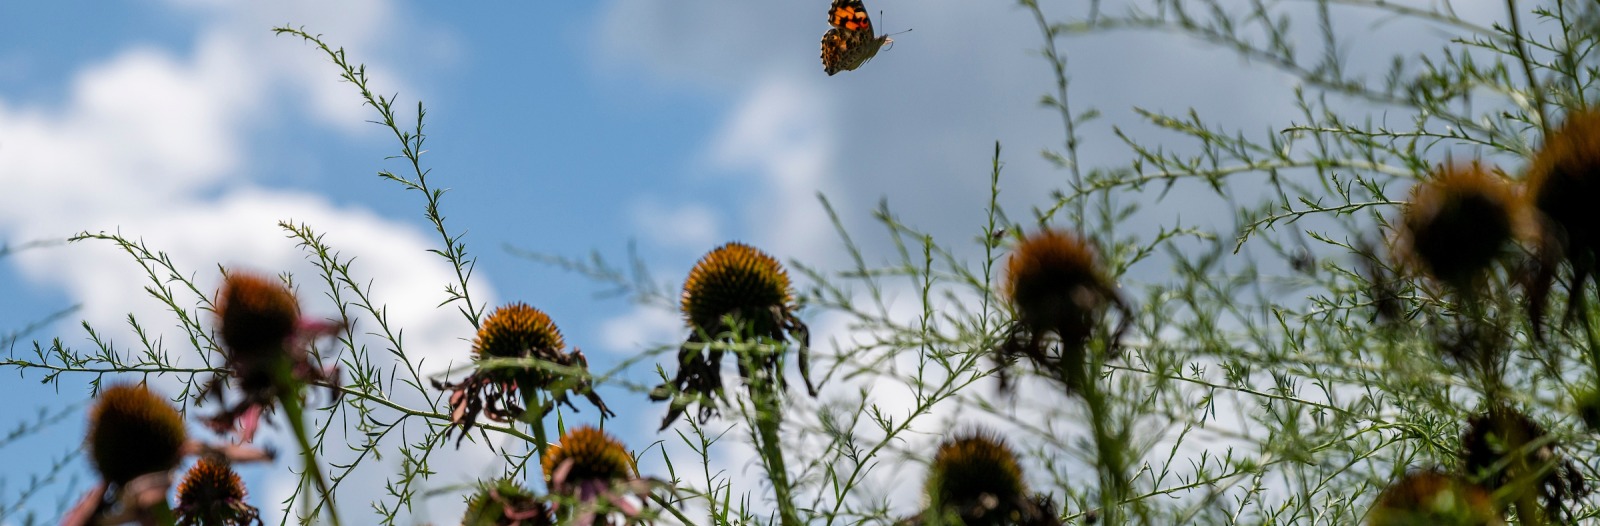 Background image of flowers and a butterfly enjoying a sunny day with white fluffy clouds.